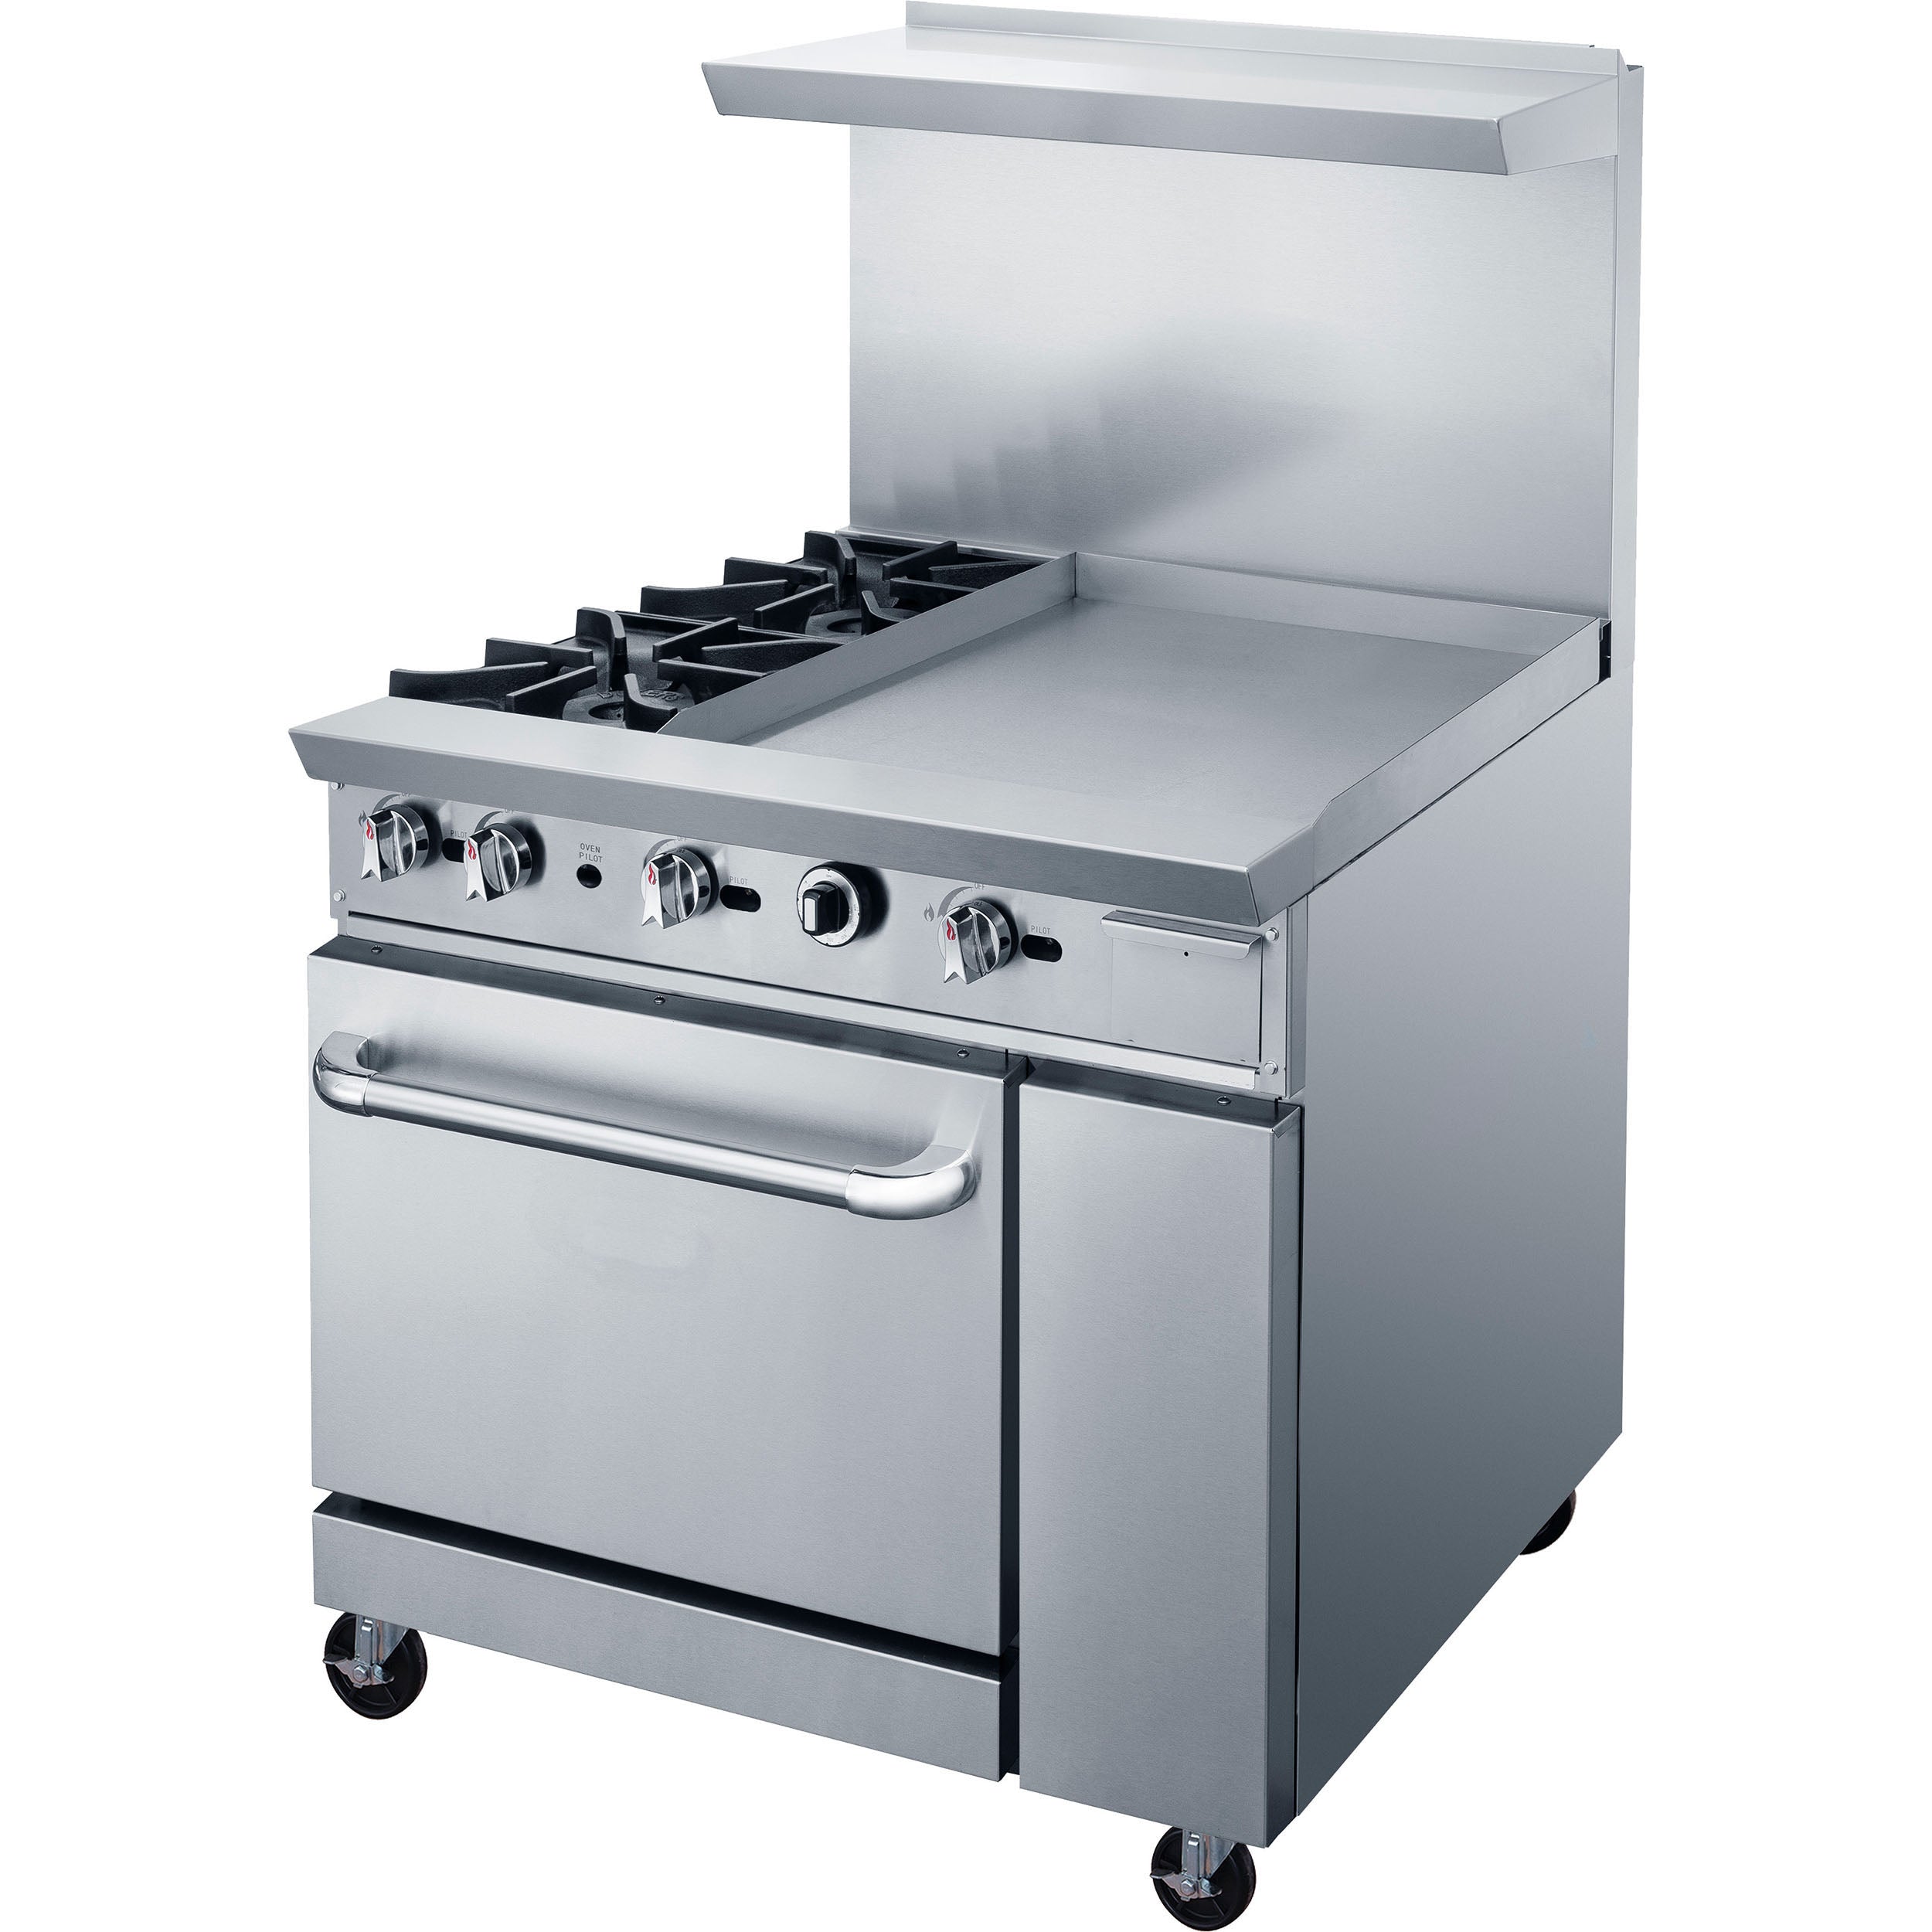 36 Commercial Stainless Steel Gas Range, 36 Griddle with Standard Oven